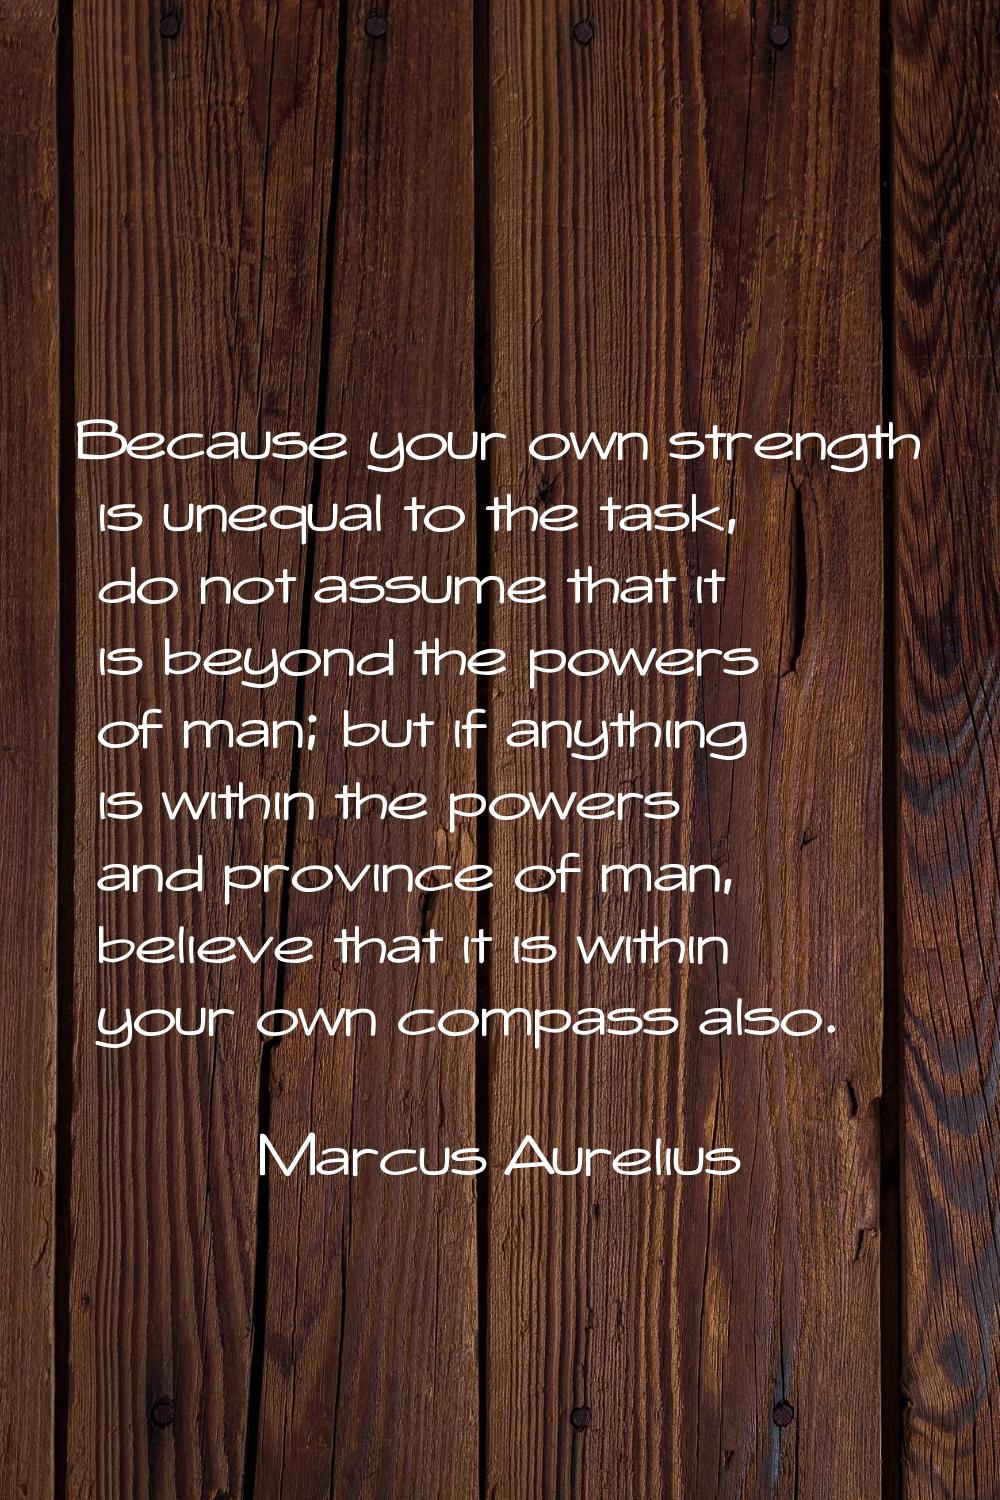 Because your own strength is unequal to the task, do not assume that it is beyond the powers of man